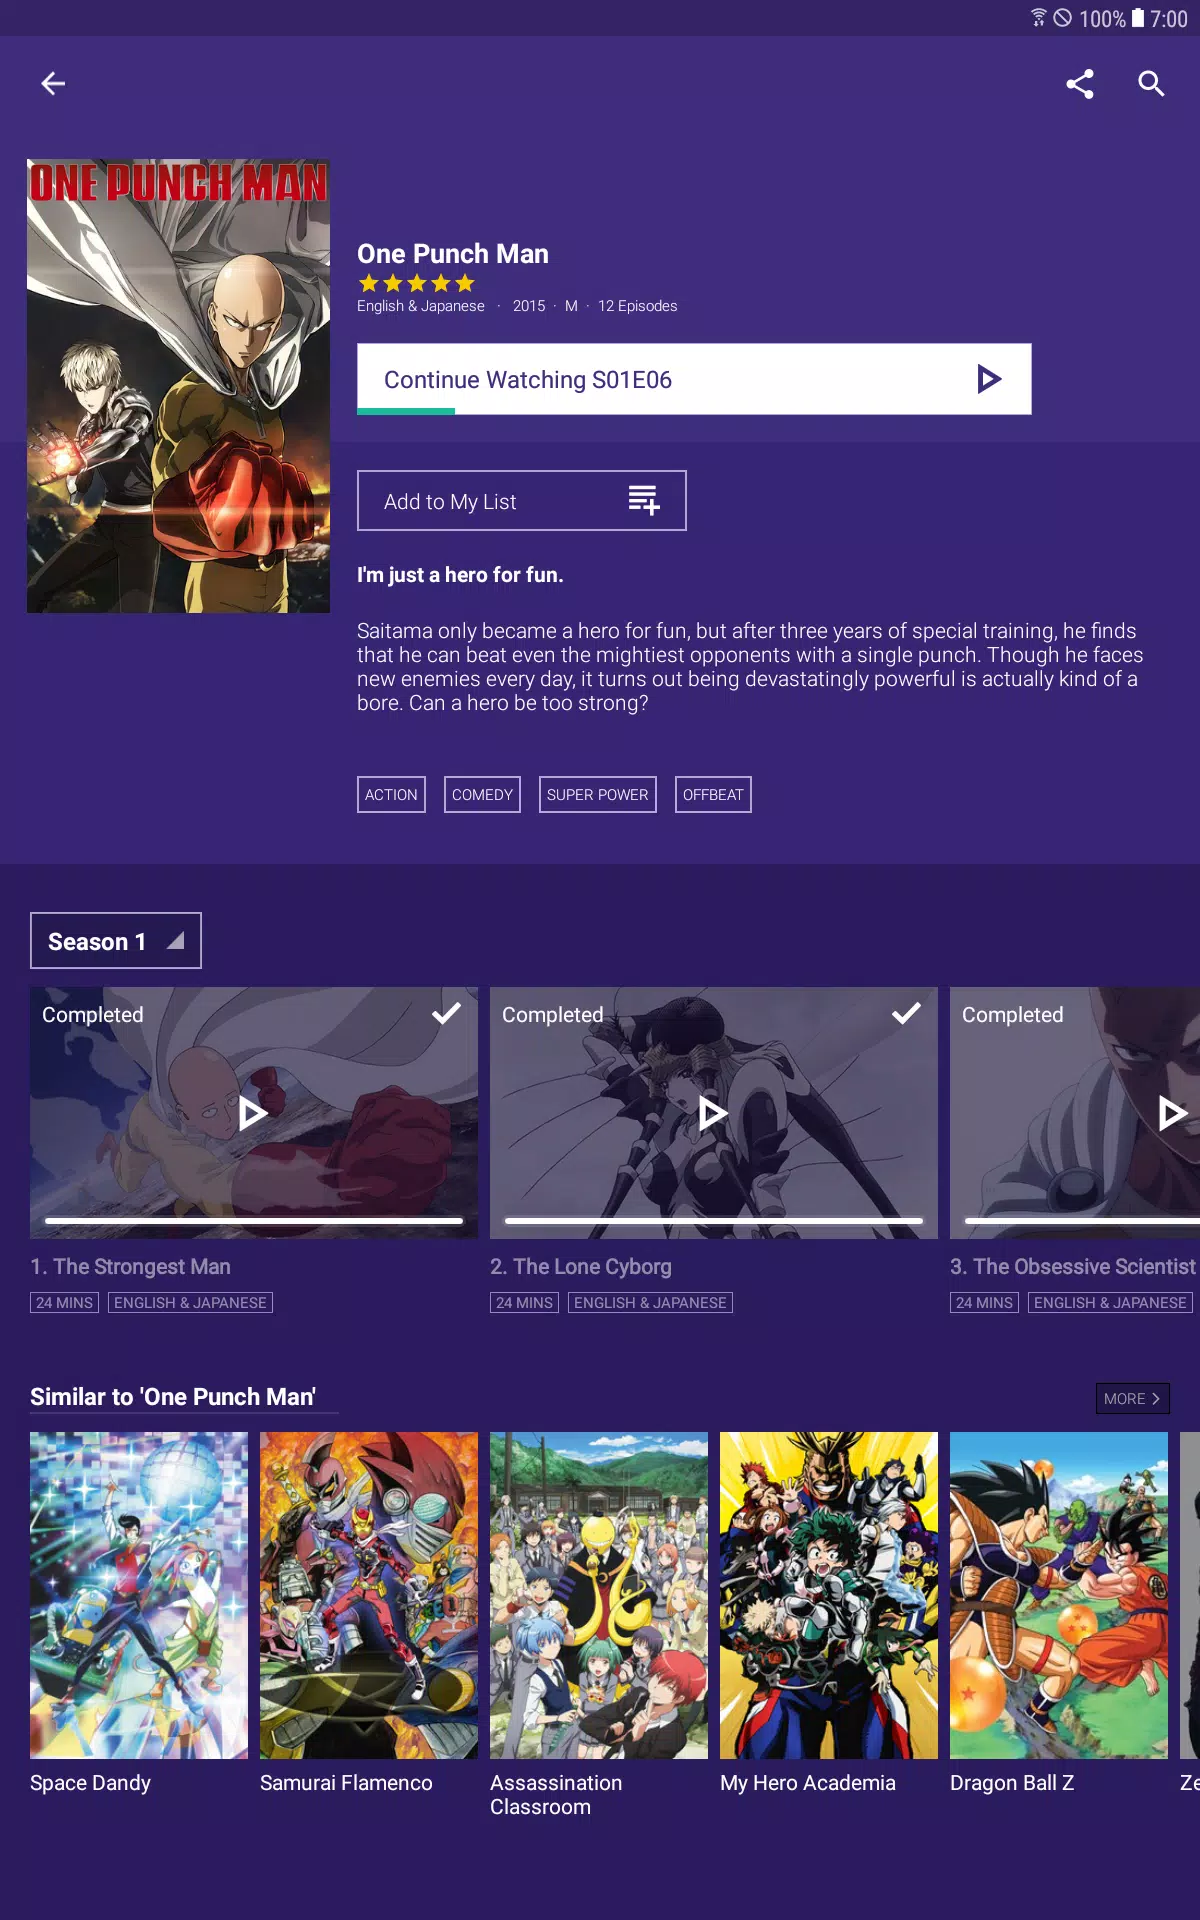 AnimeLab - Watch Anime Free APK for Android - Download